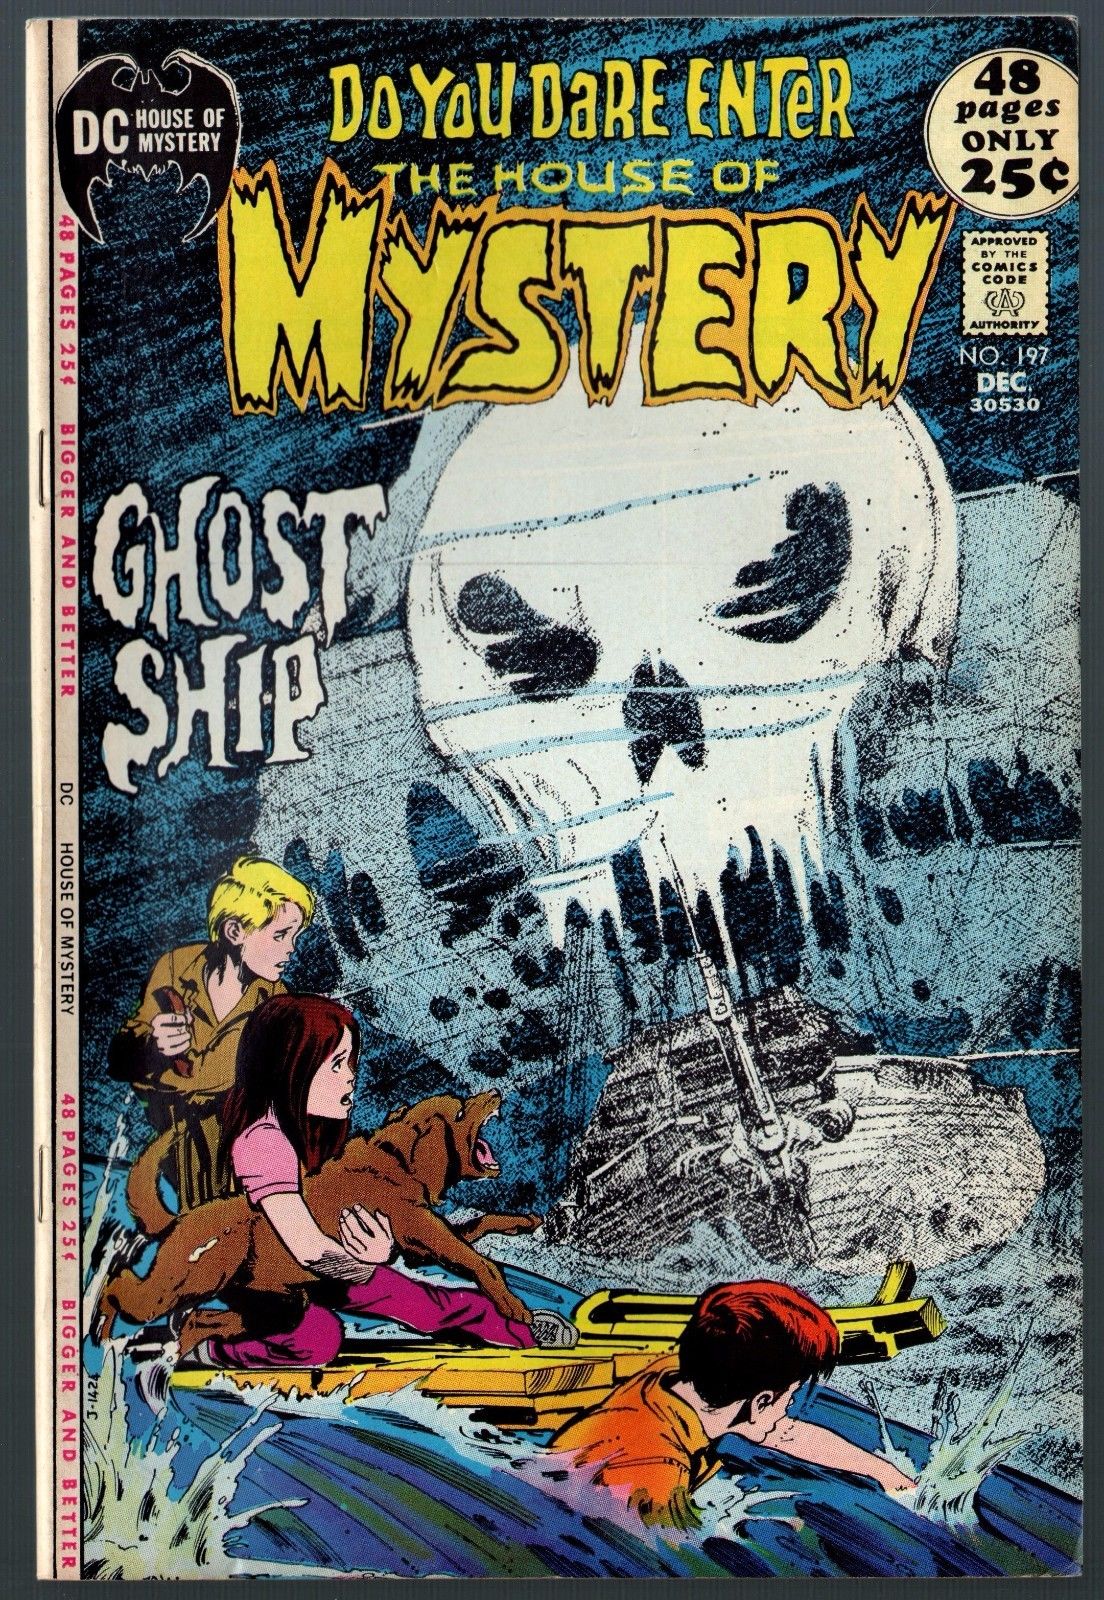 1977 BRONZE AGE.. 80 PAGE GIANT NEAL ADAMS COVER 252 THE HOUSE OF MYSTERY